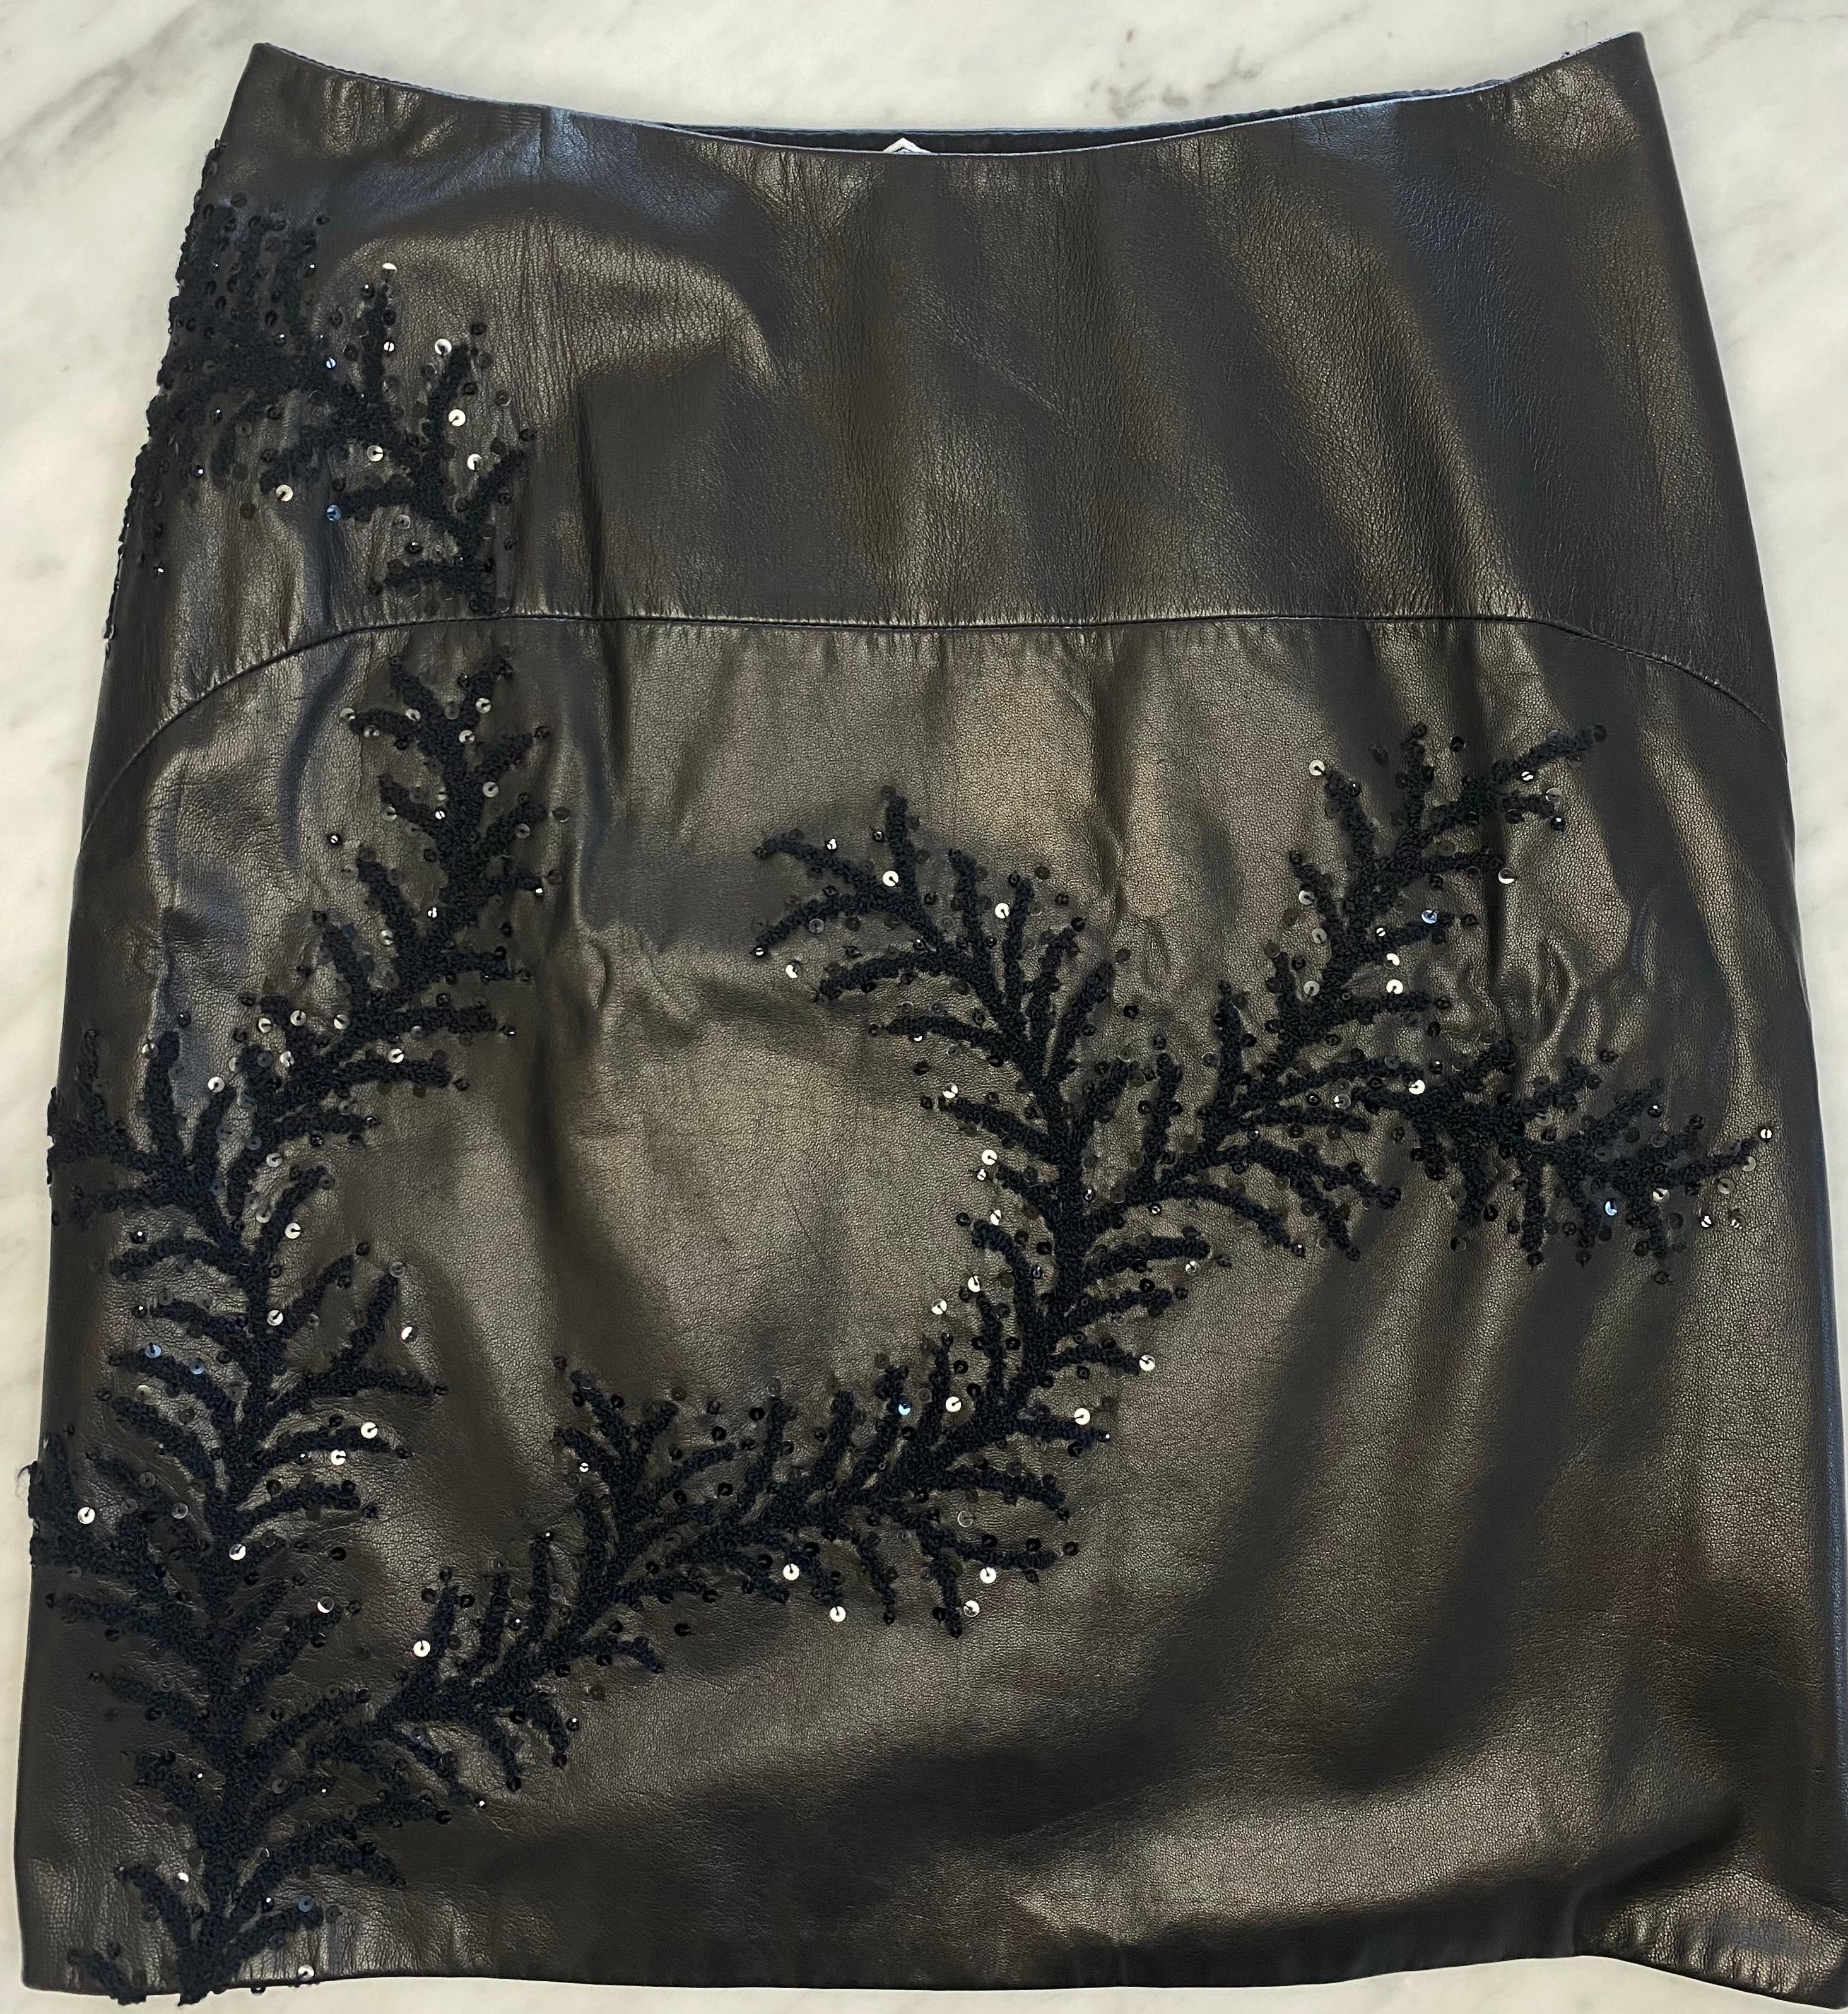 S/S 1999 Atelier Versace Runway Donatella Sequin Embroidered Leather Skirt Set In Good Condition For Sale In West Hollywood, CA